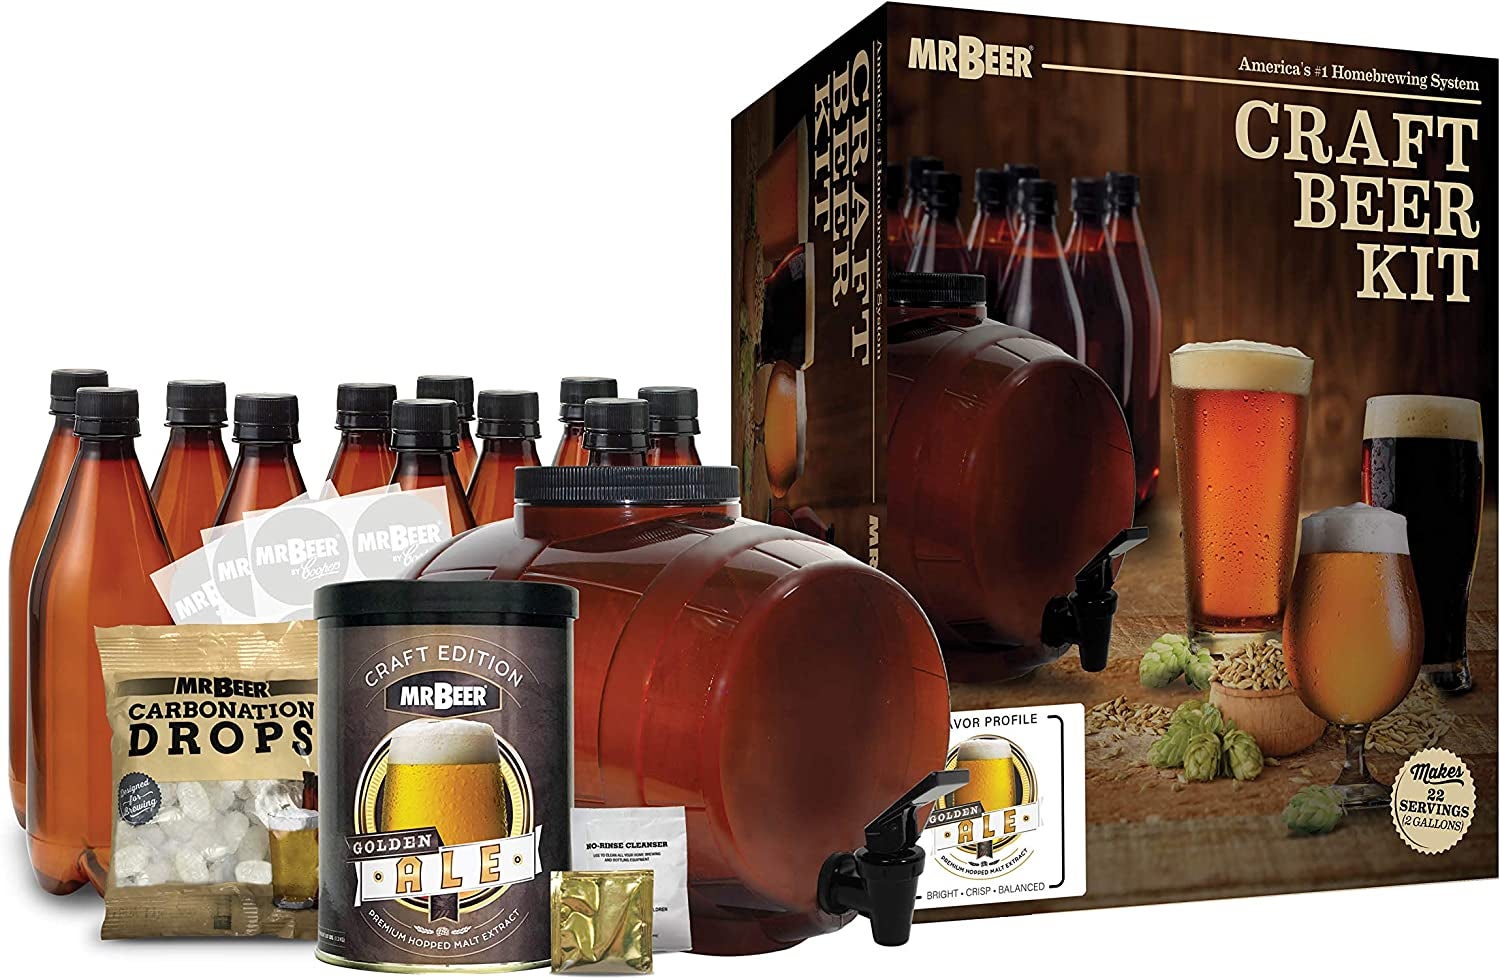 the beer kit with carbonated drops, bottles, and more